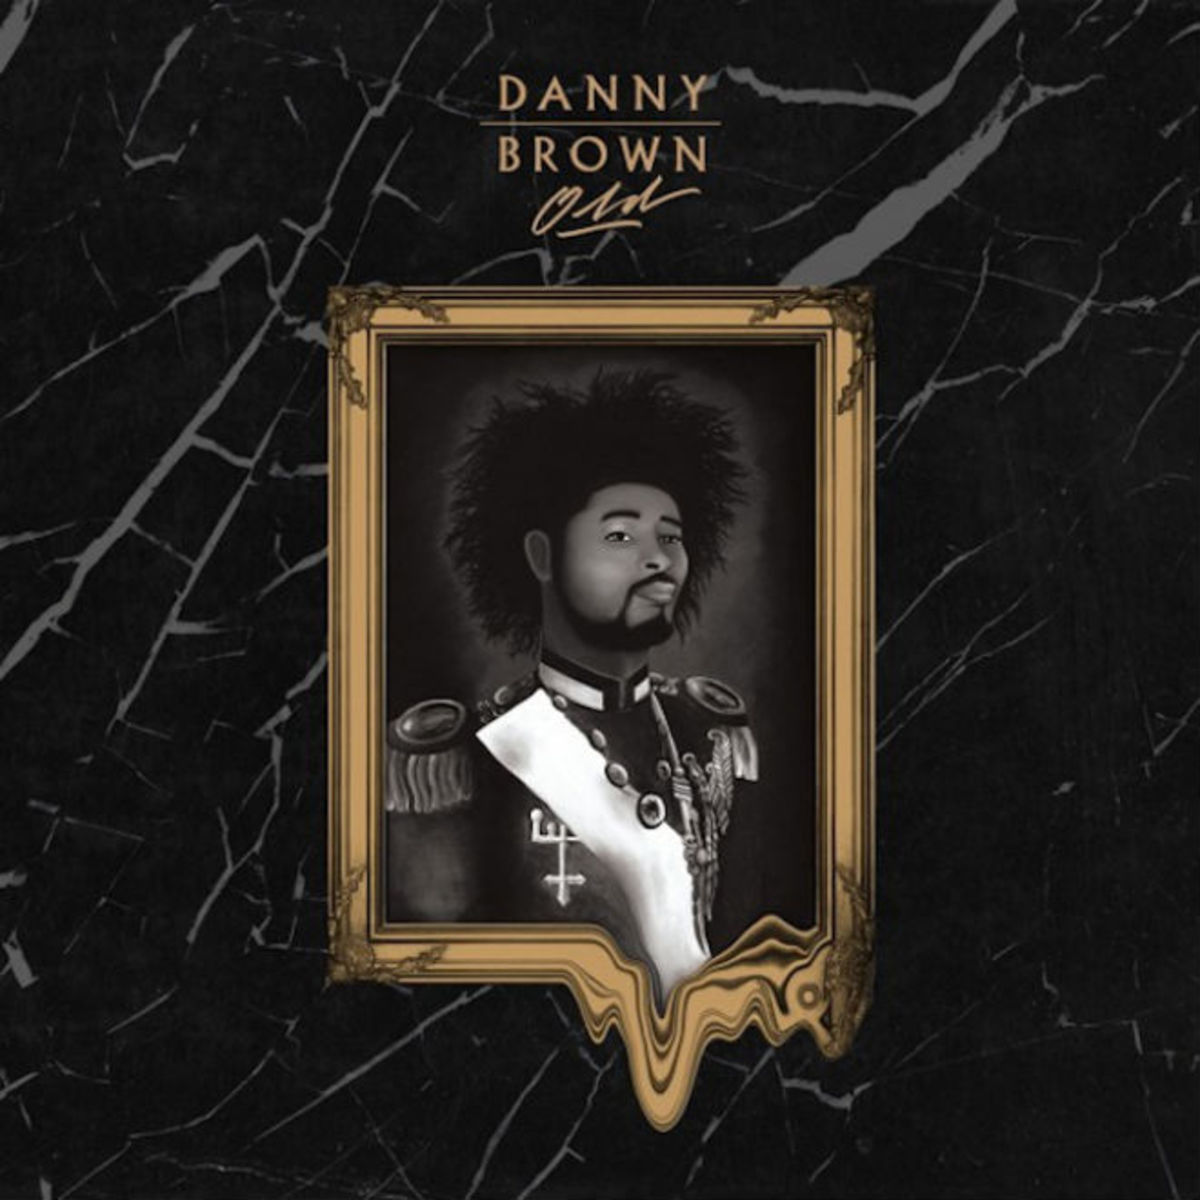 Cover Art for Danny Brown's Old